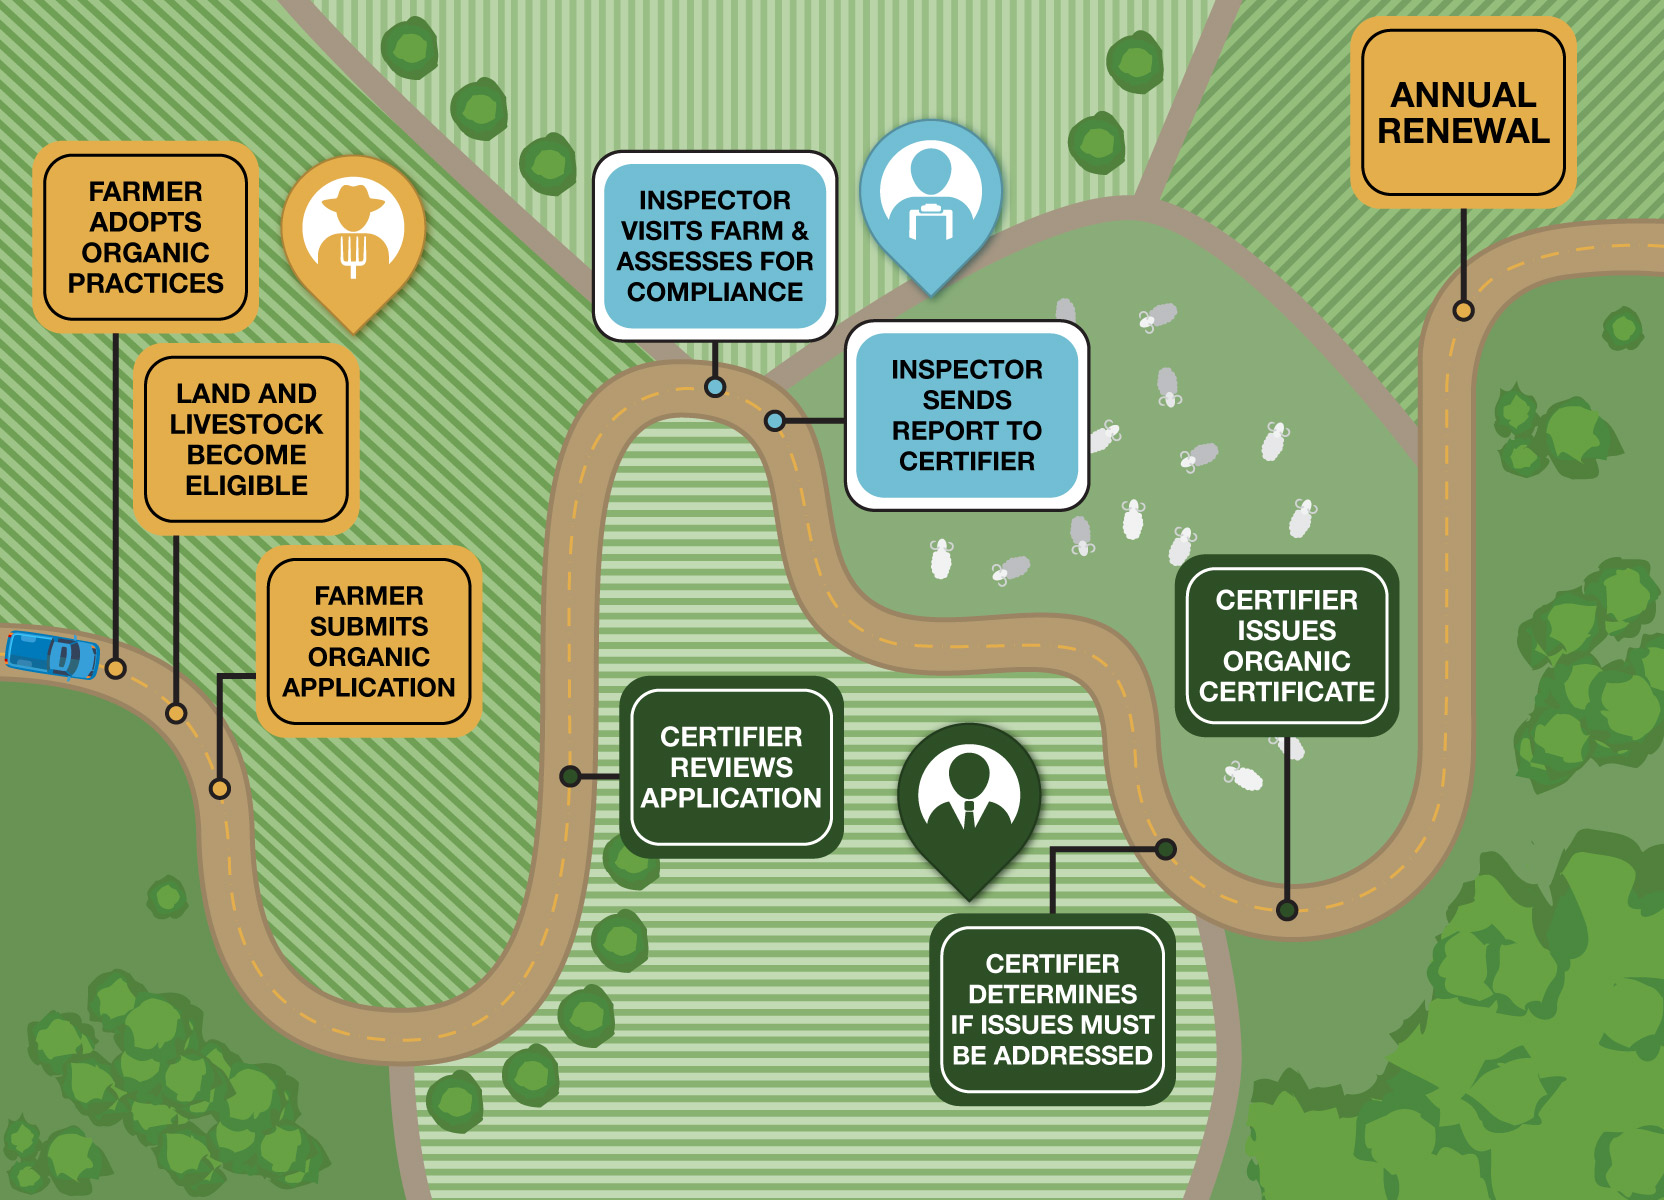 Flowchart graphic showing the steps in organic certification and annual renewal